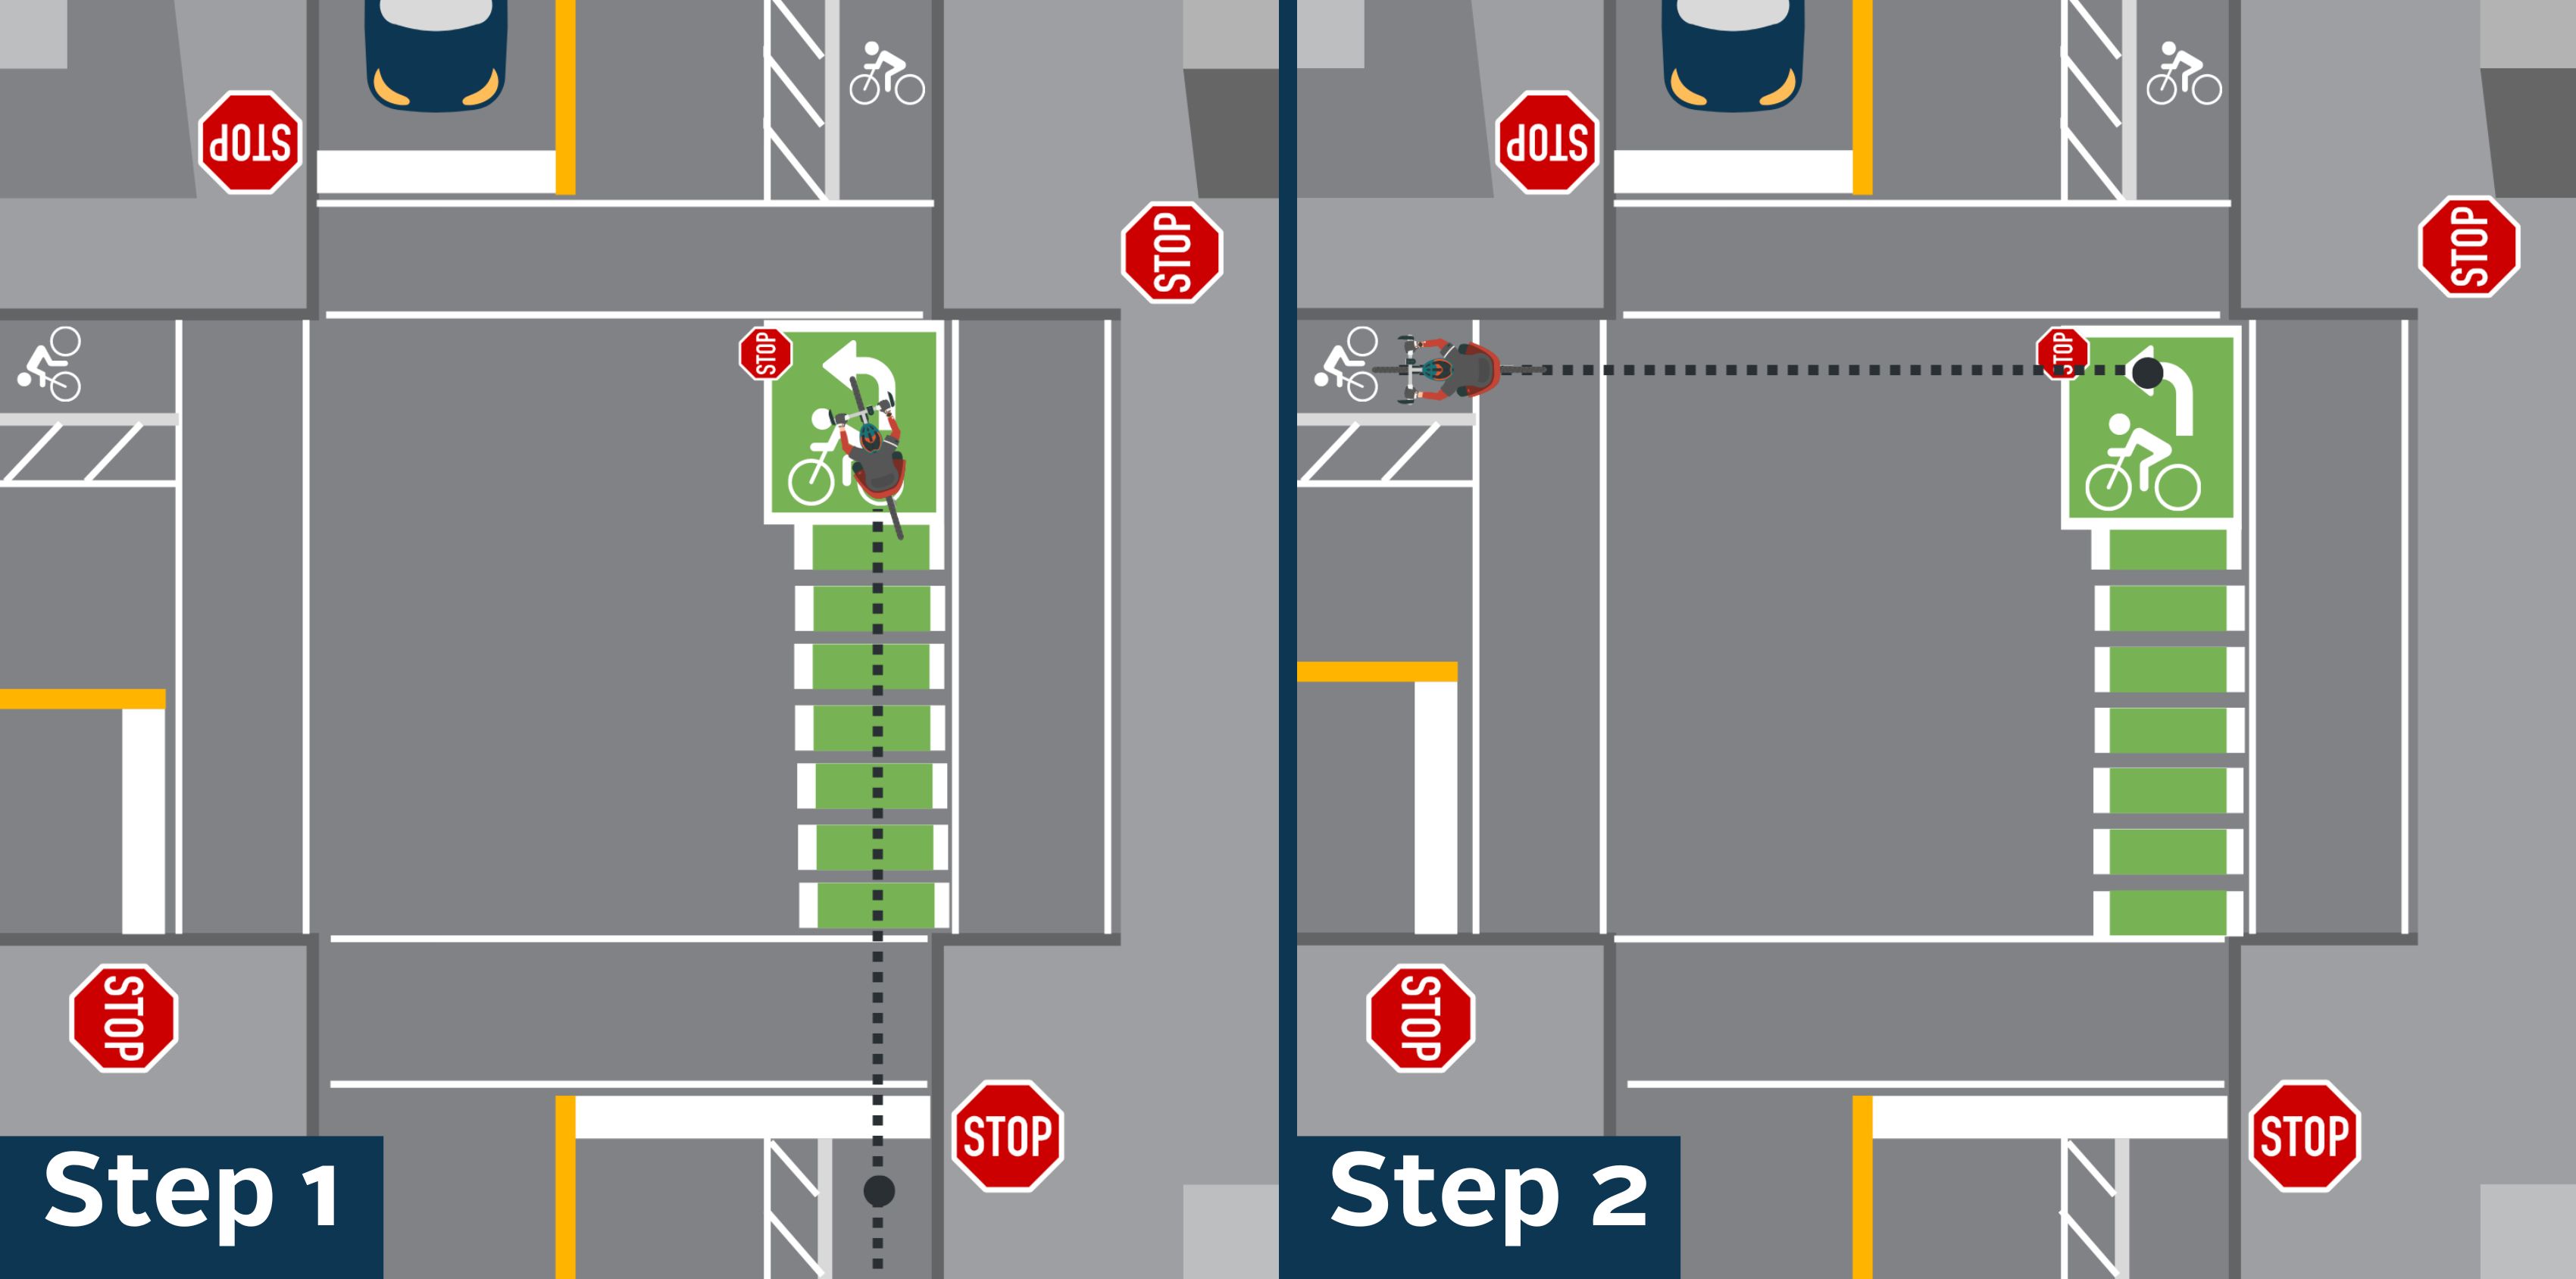 A two-step diagram shows how to cycle using a two-step turn box at an "all-way stop" intersection. The cyclist starts behind the line, travels to the turn-box, stops, then proceeds once it is their turn.